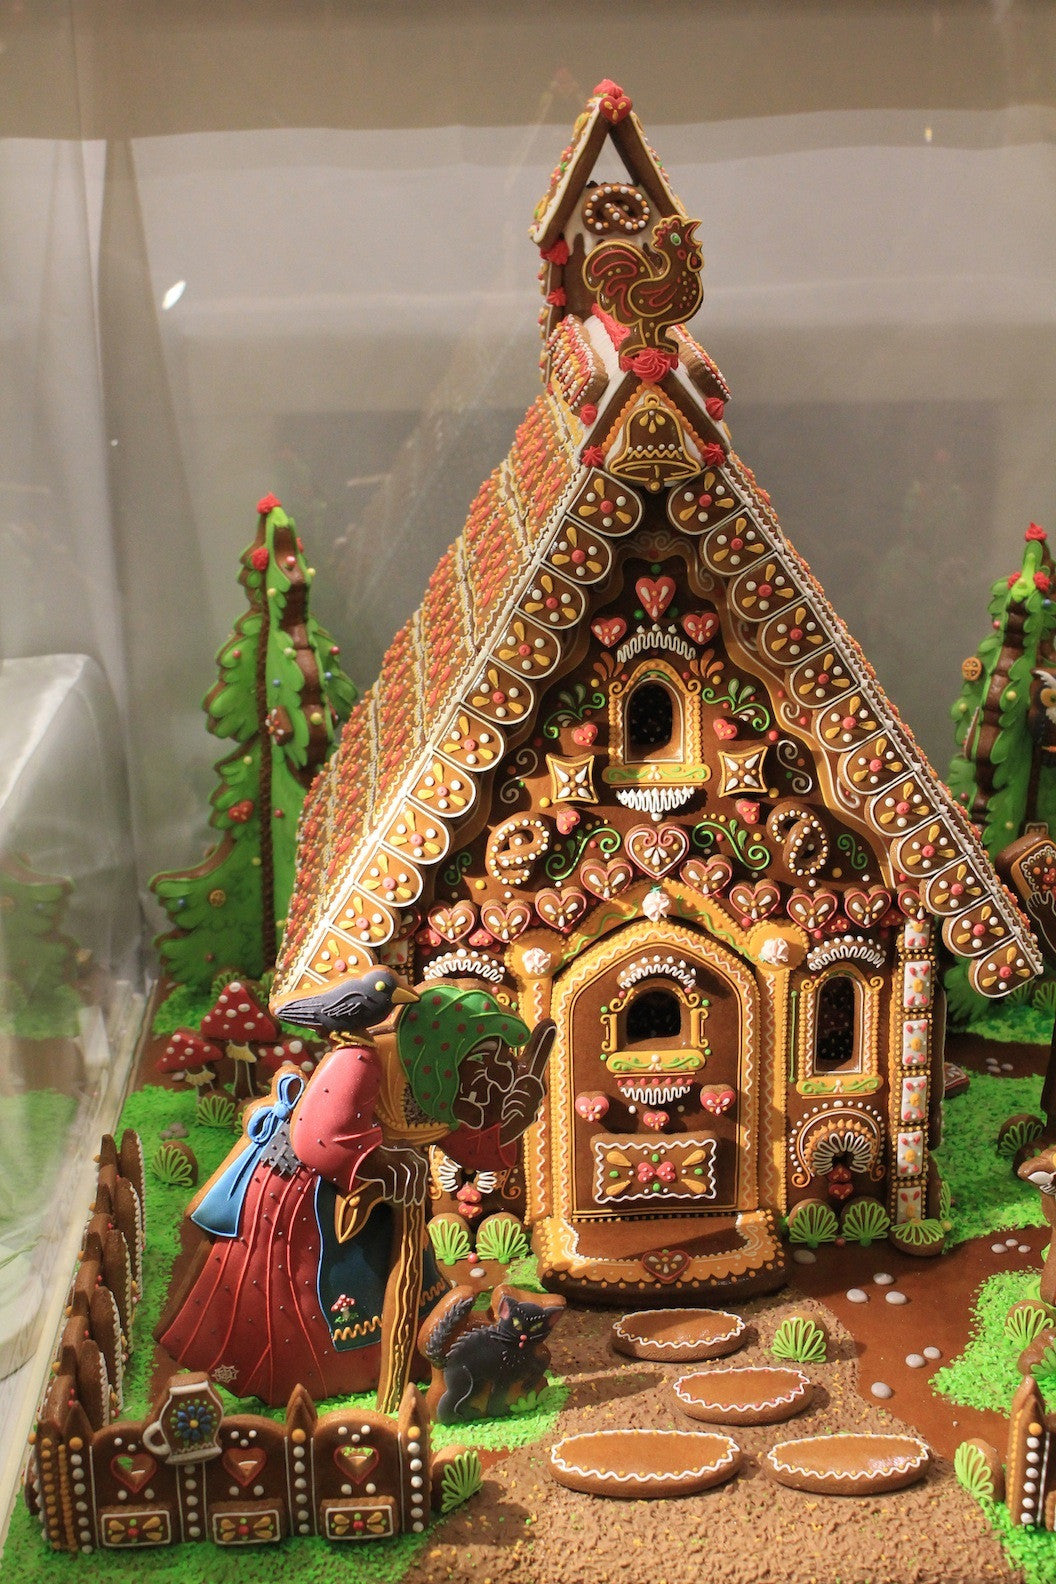 How Gingerbread Houses Became a Christmas Tradition